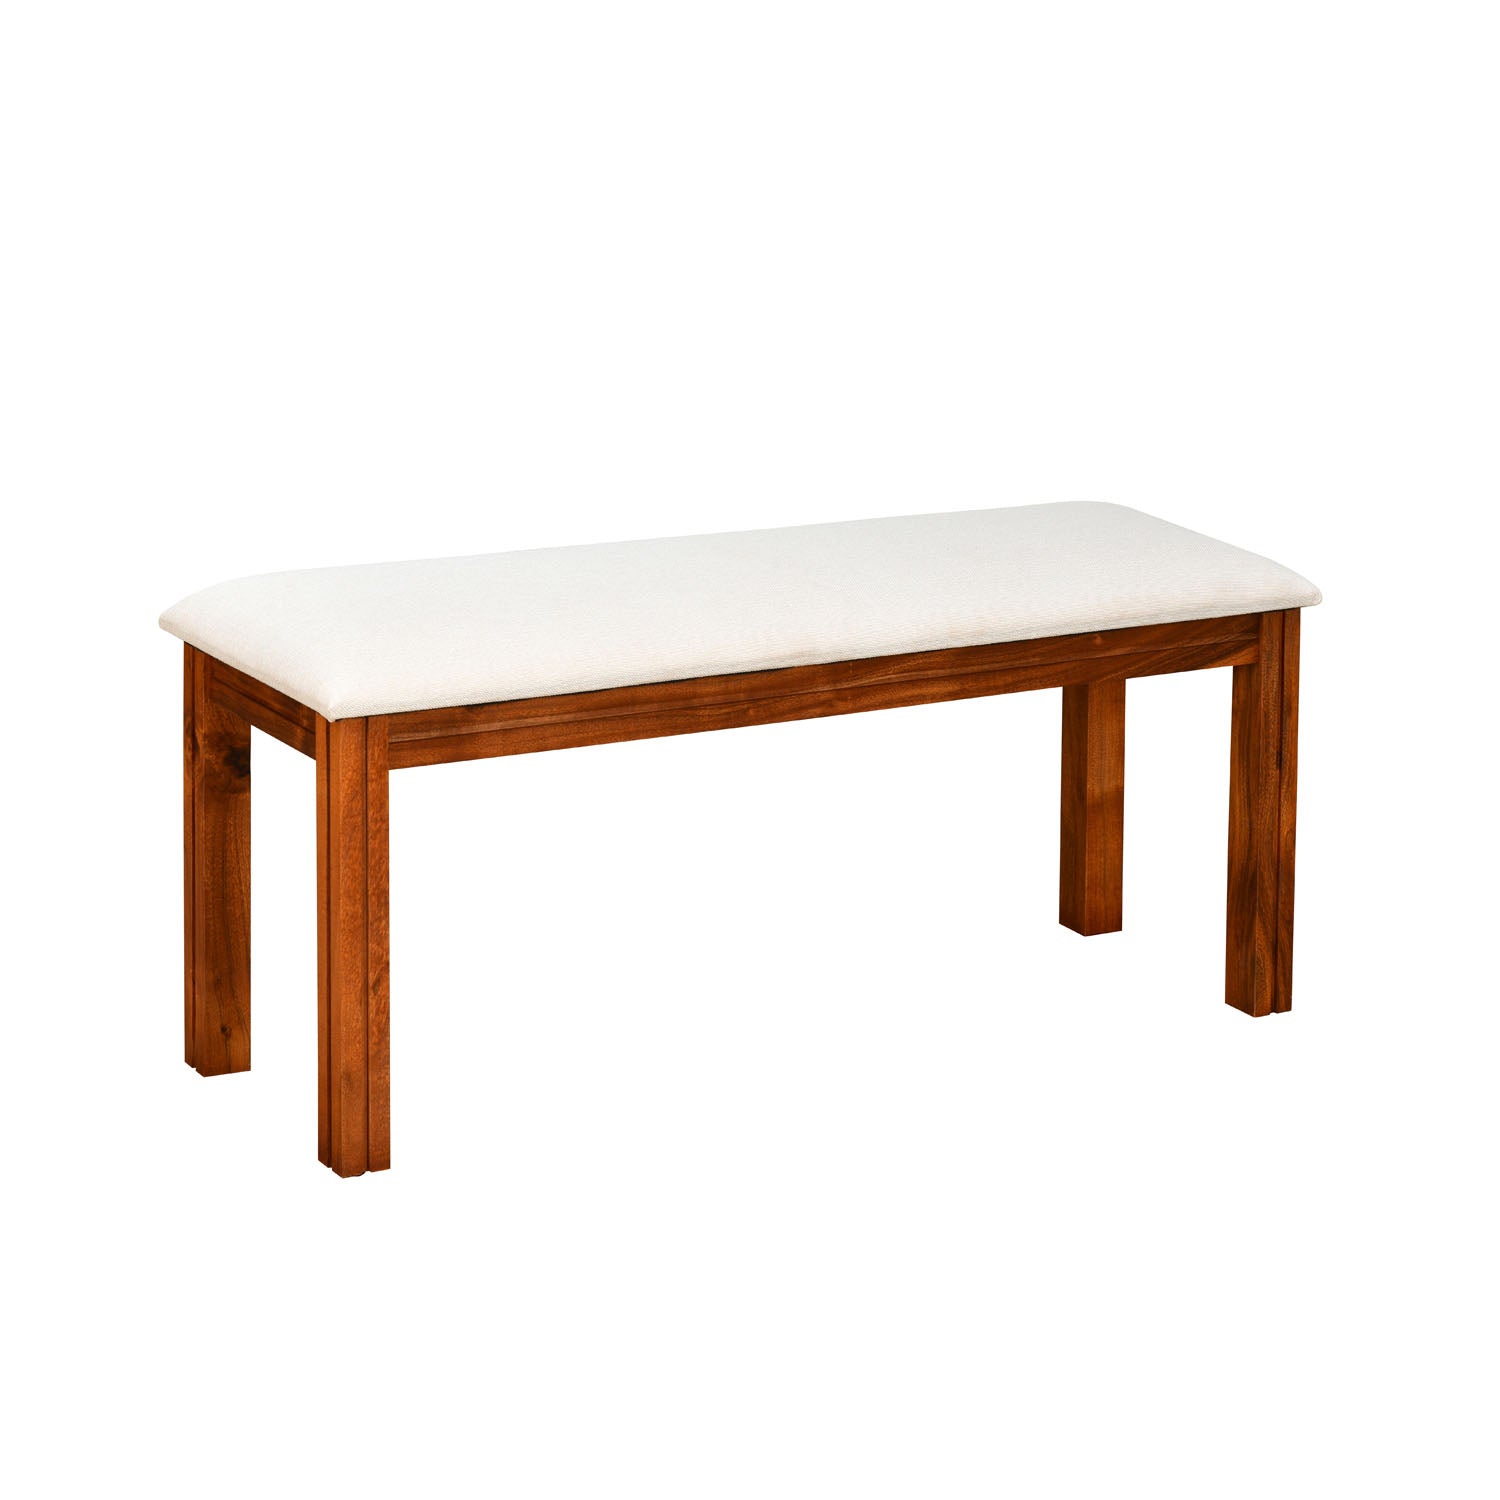 Vera 4 Searer Solid Wood Dining Bench (Honey Brown)